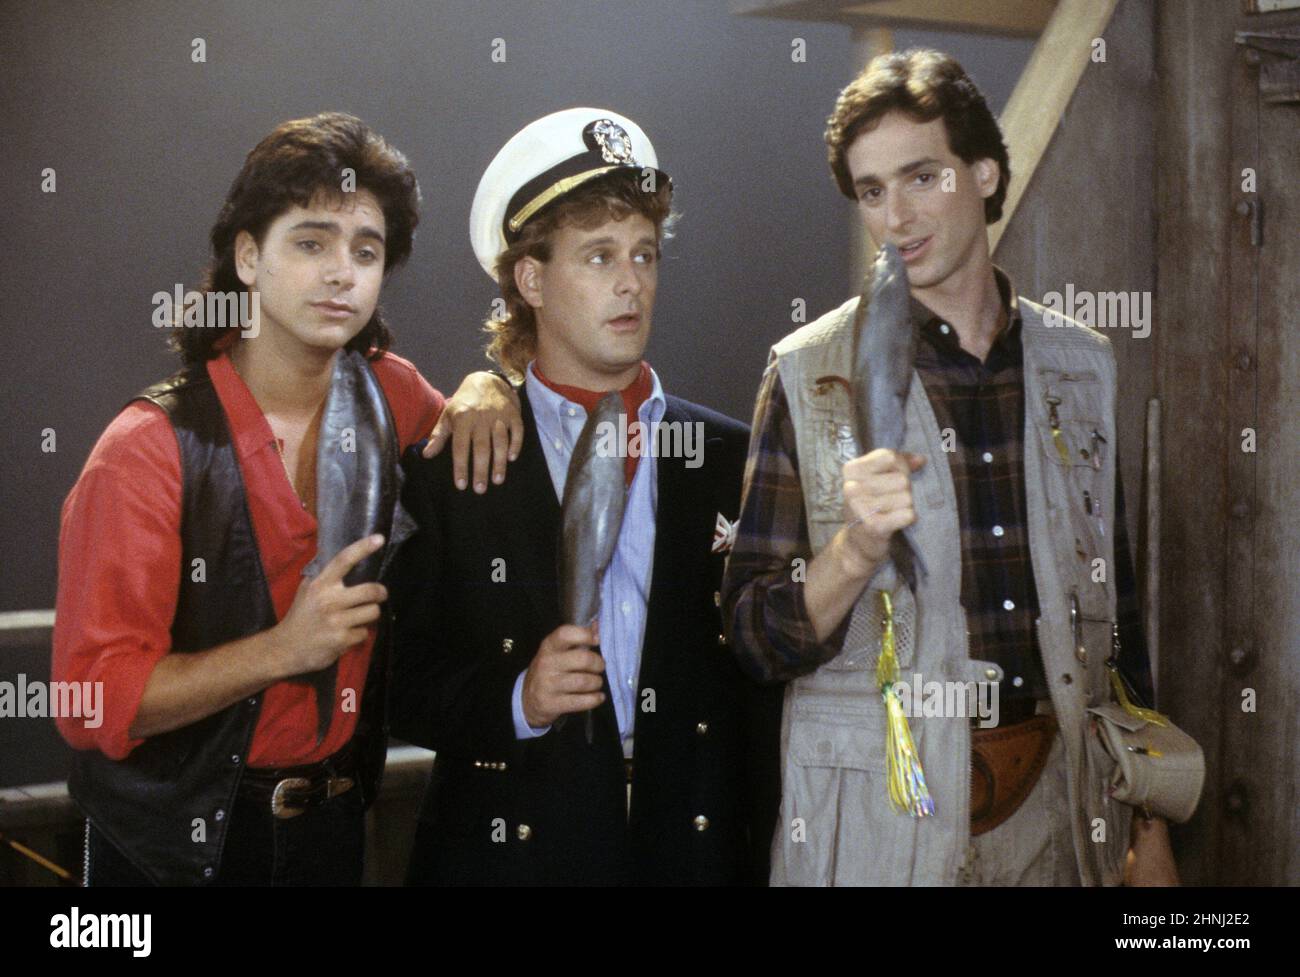 BOB SAGET, JOHN STAMOS and DAVE COULIER in FULL HOUSE (1987), directed by JEFF FRANKLIN. Credit: LORIMAR PRODUCTIONS / Album Stock Photo